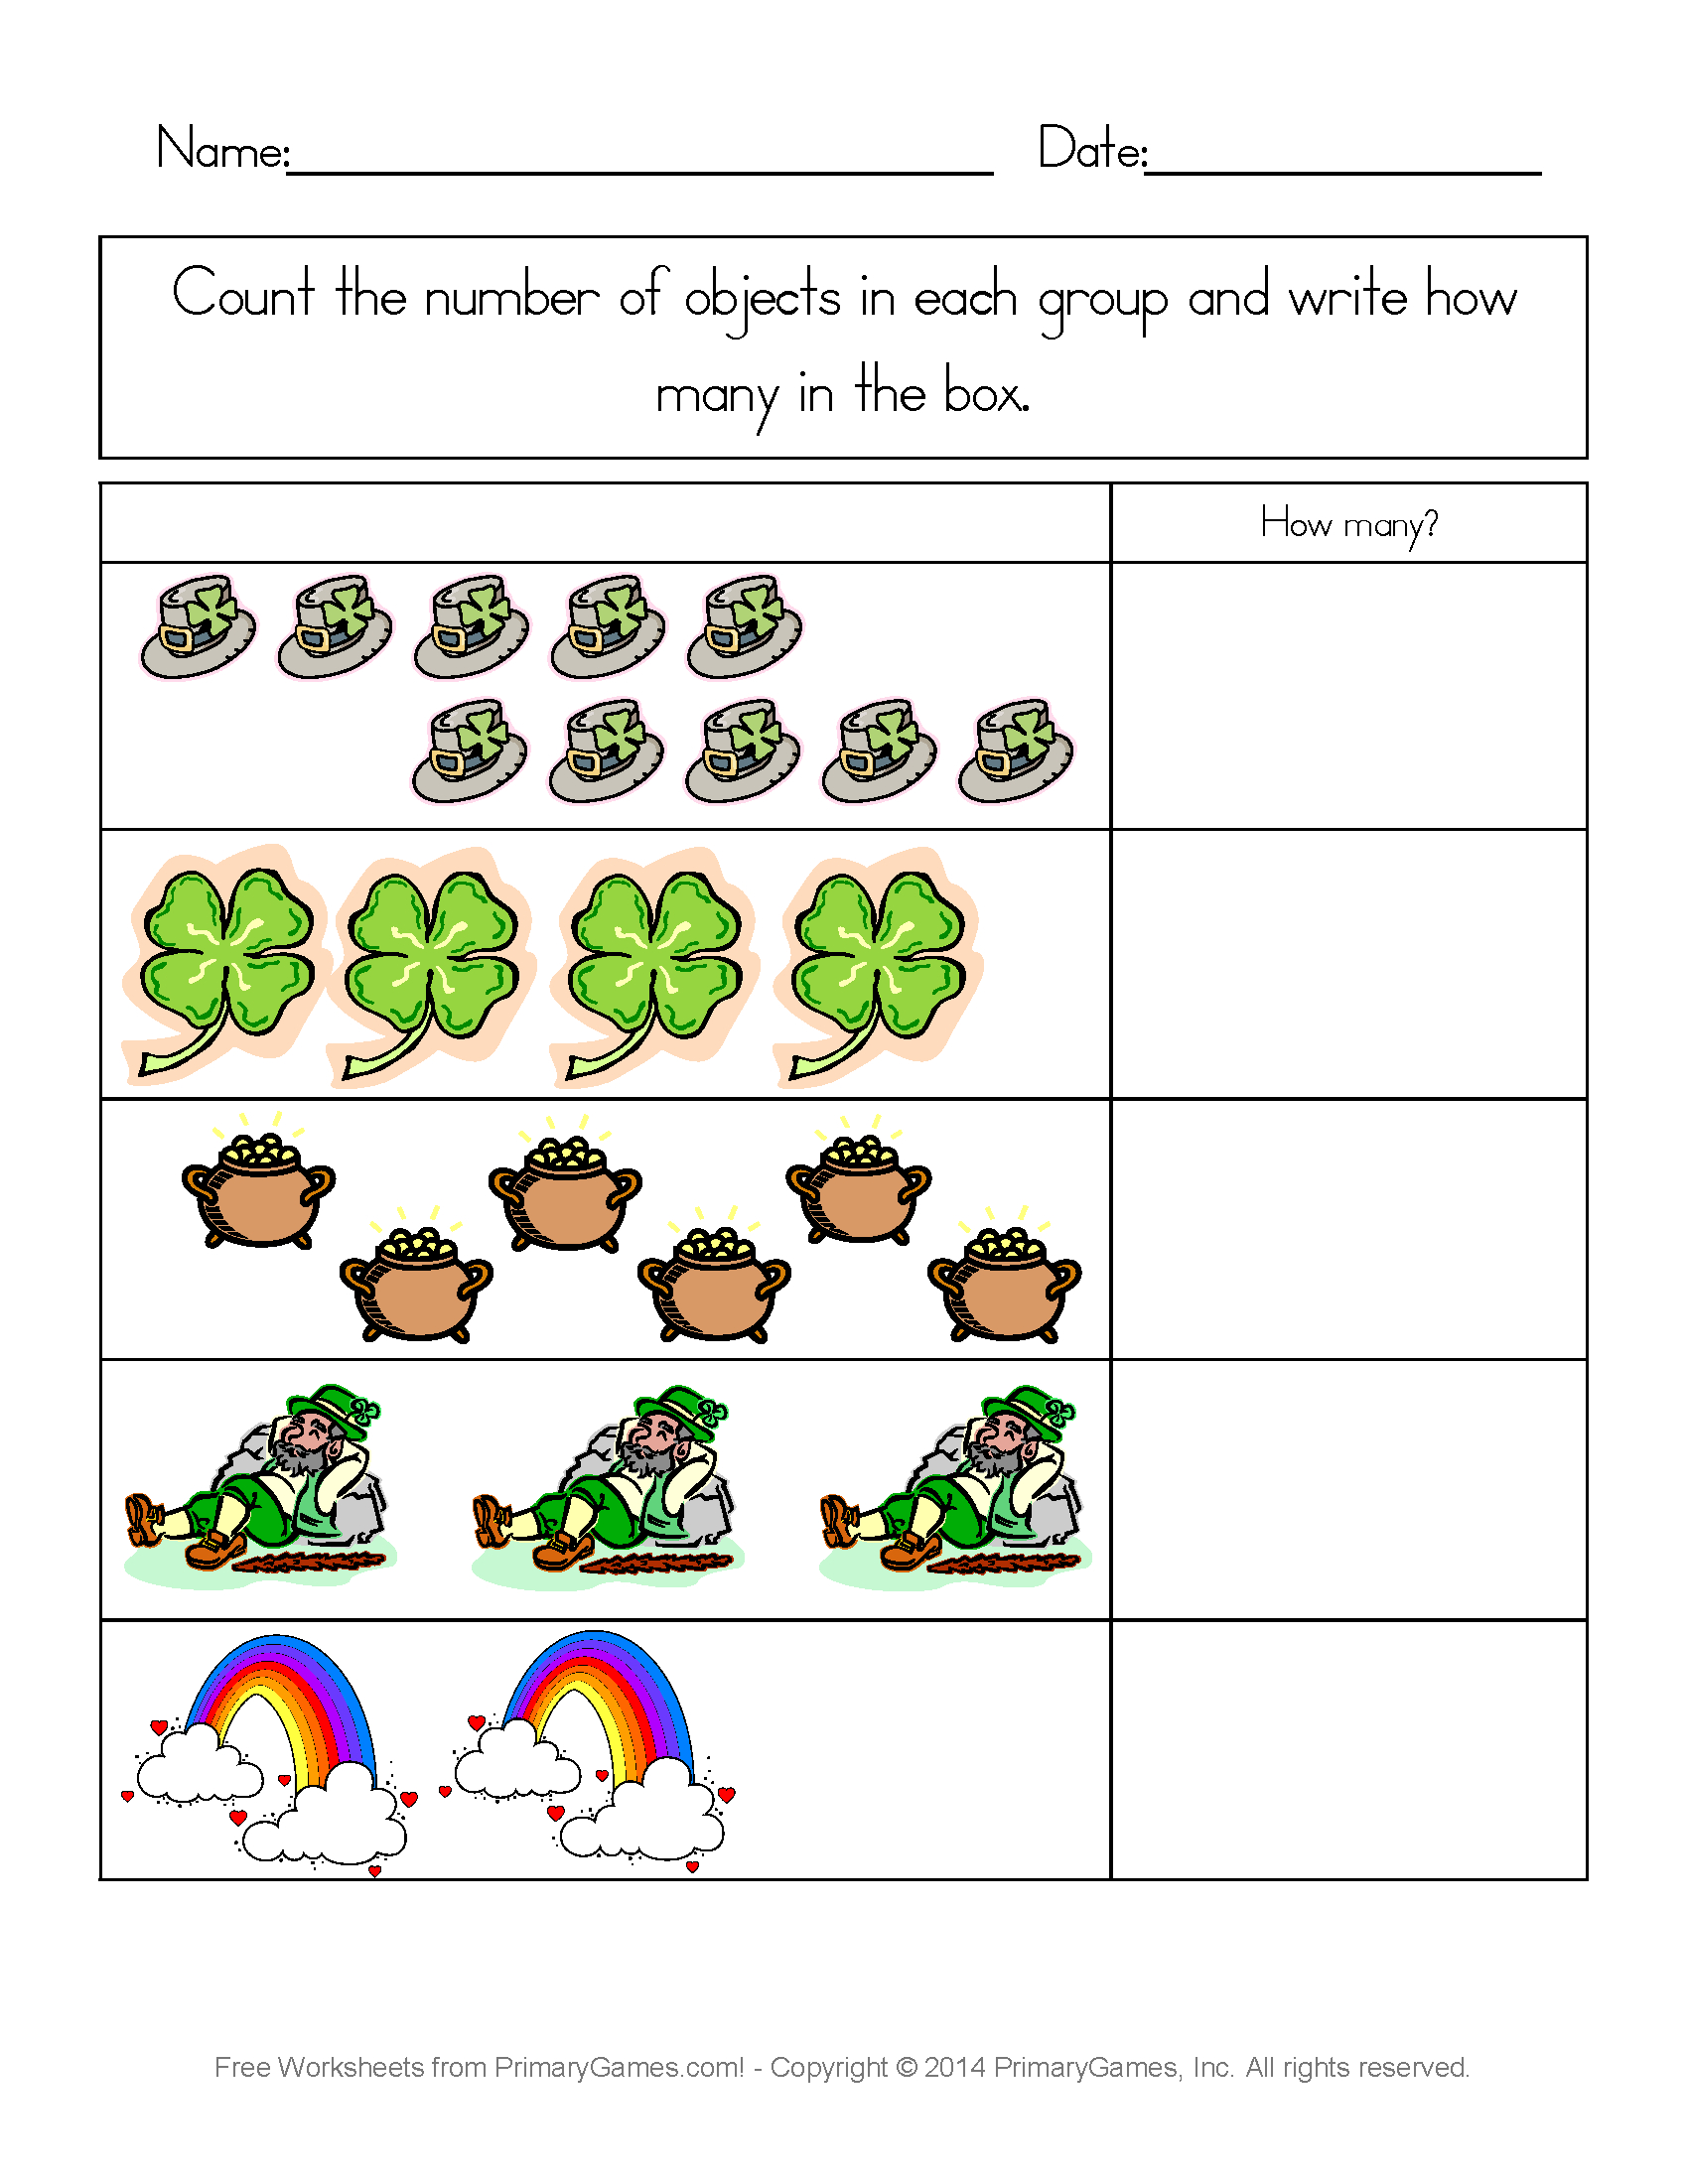 St. Patrick&amp;#039;s Day Worksheets: St. Patrick&amp;#039;s Day Counting Practice - Free Printable St Patrick Day Worksheets